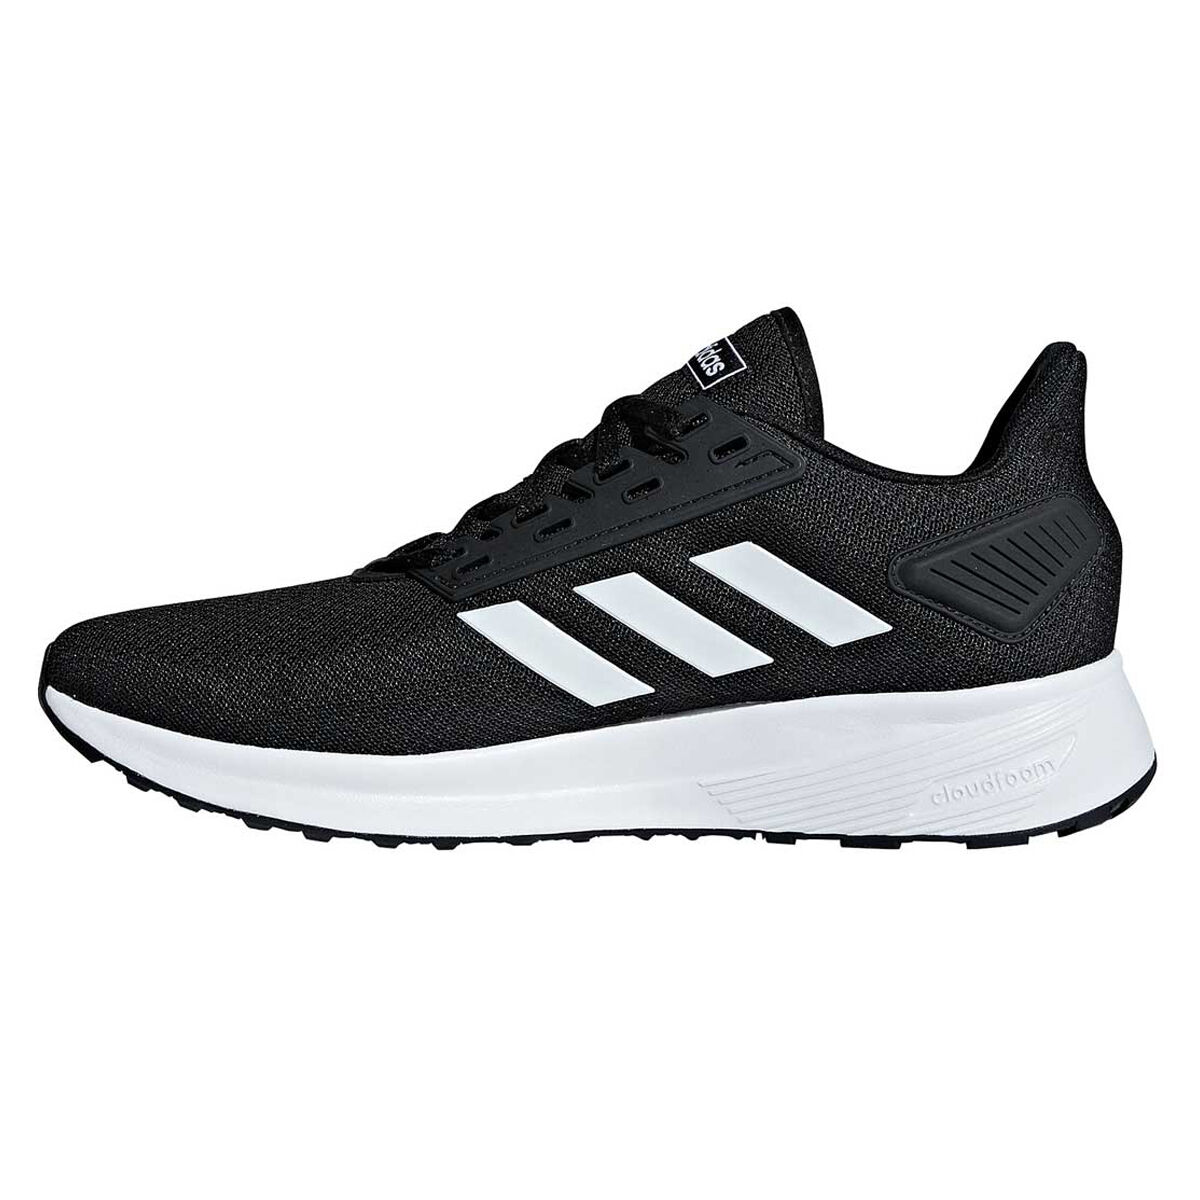 adidas shoes good for running